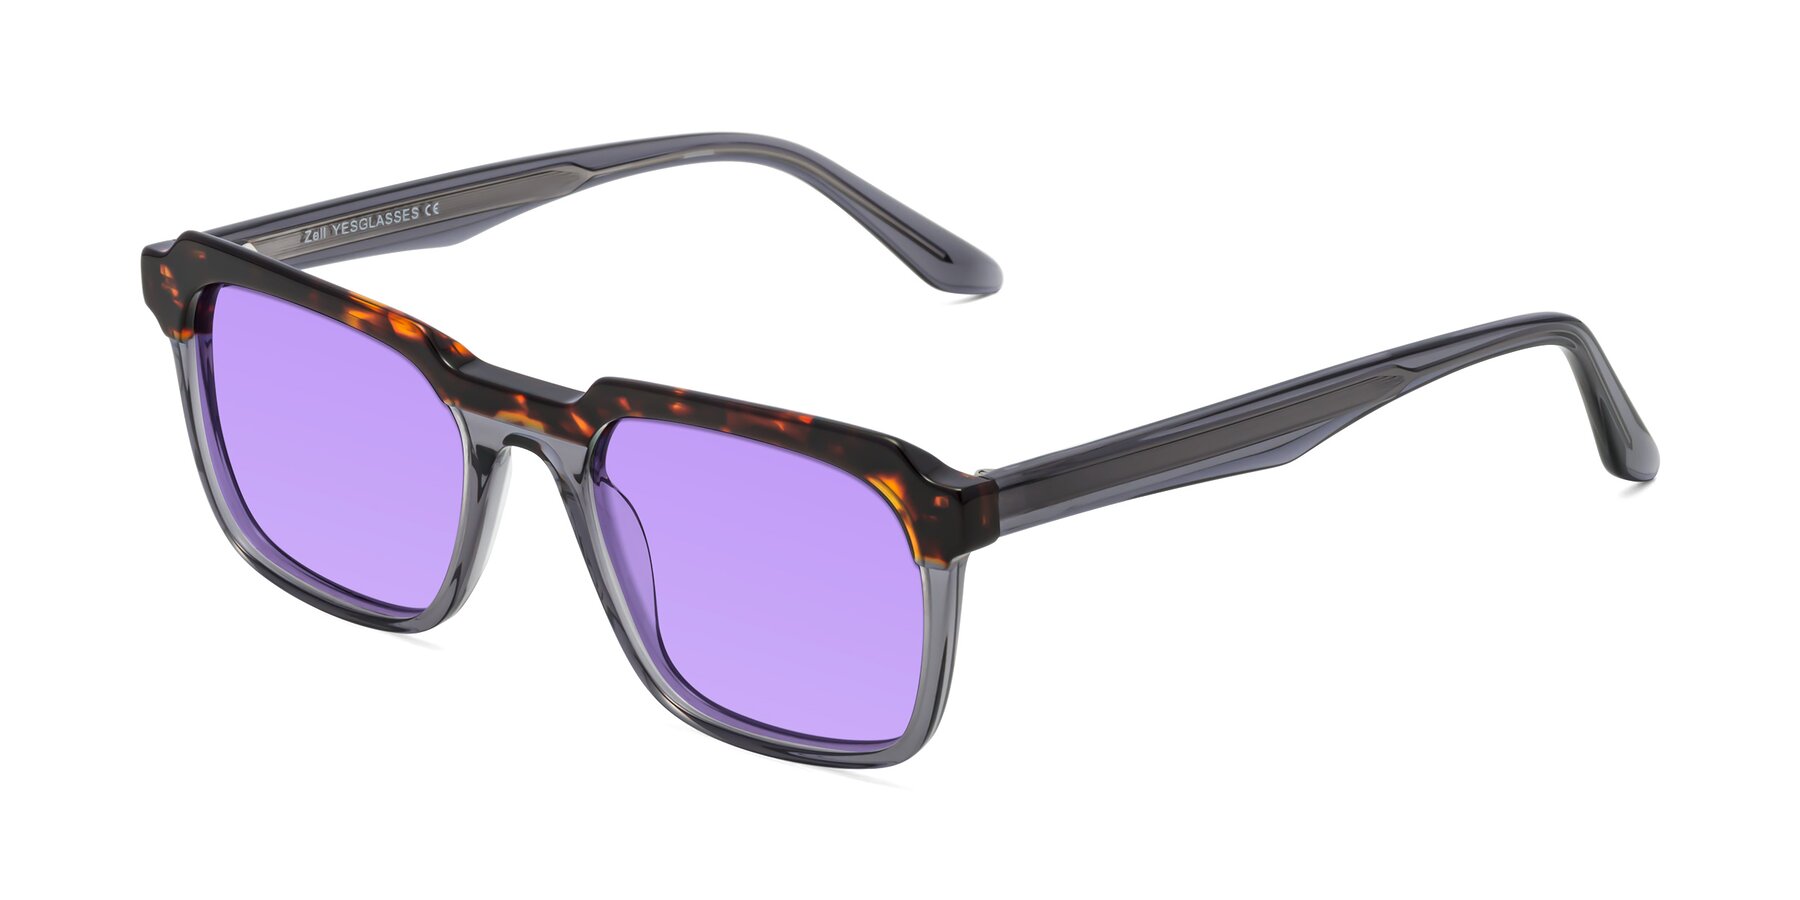 Angle of Zell in Tortoise/Gray with Medium Purple Tinted Lenses